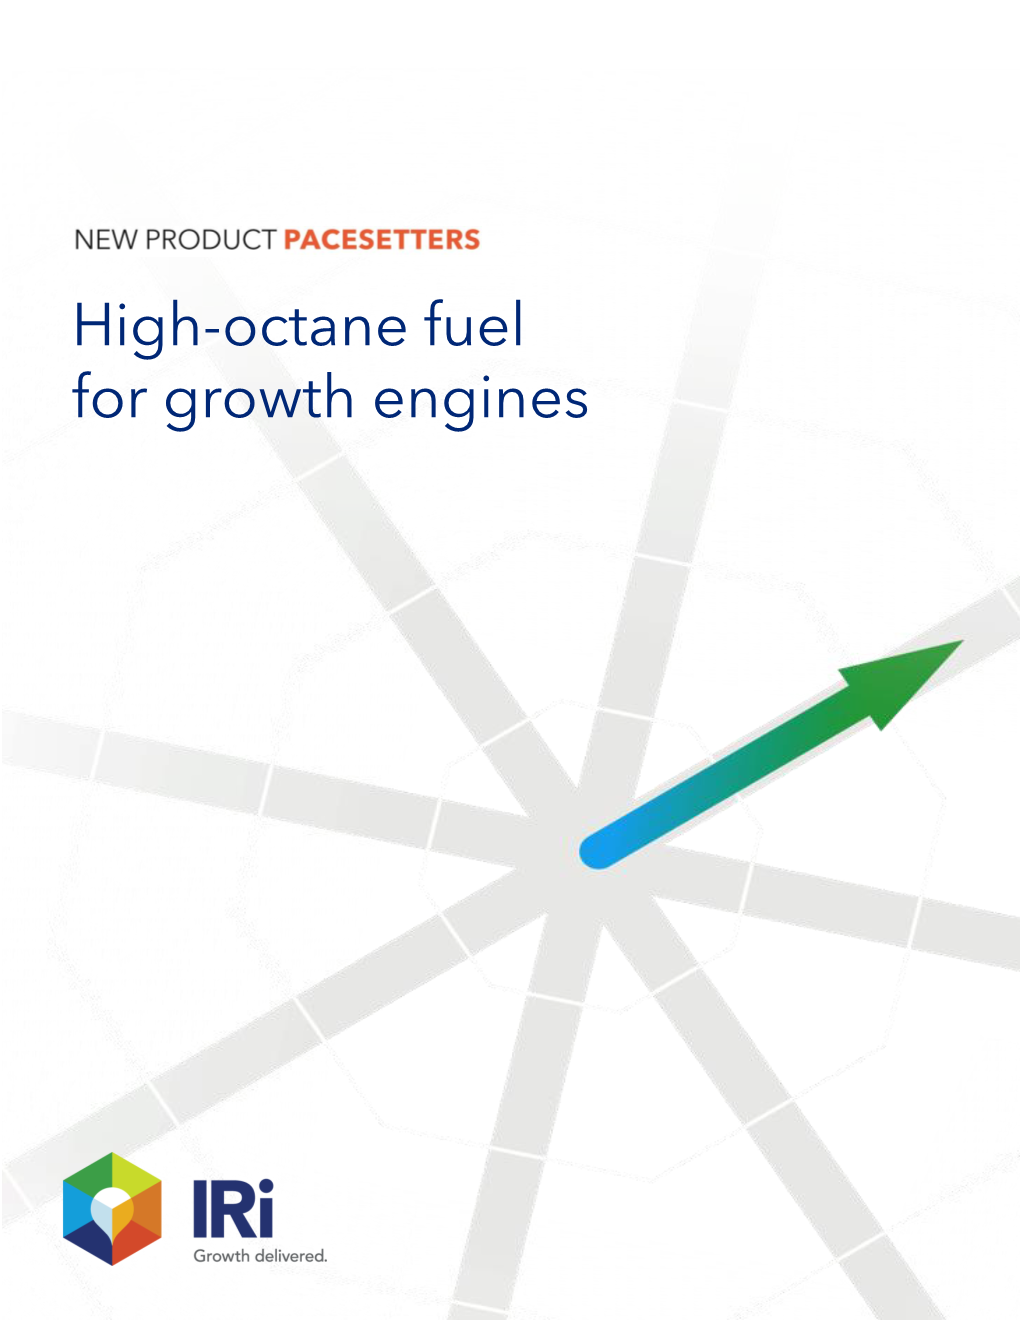 High-Octane Fuel for Growth Engines the Formula for High-Octane Fuel That Drives Growth Engines with Long-Lasting Impact on the Bottom Line…